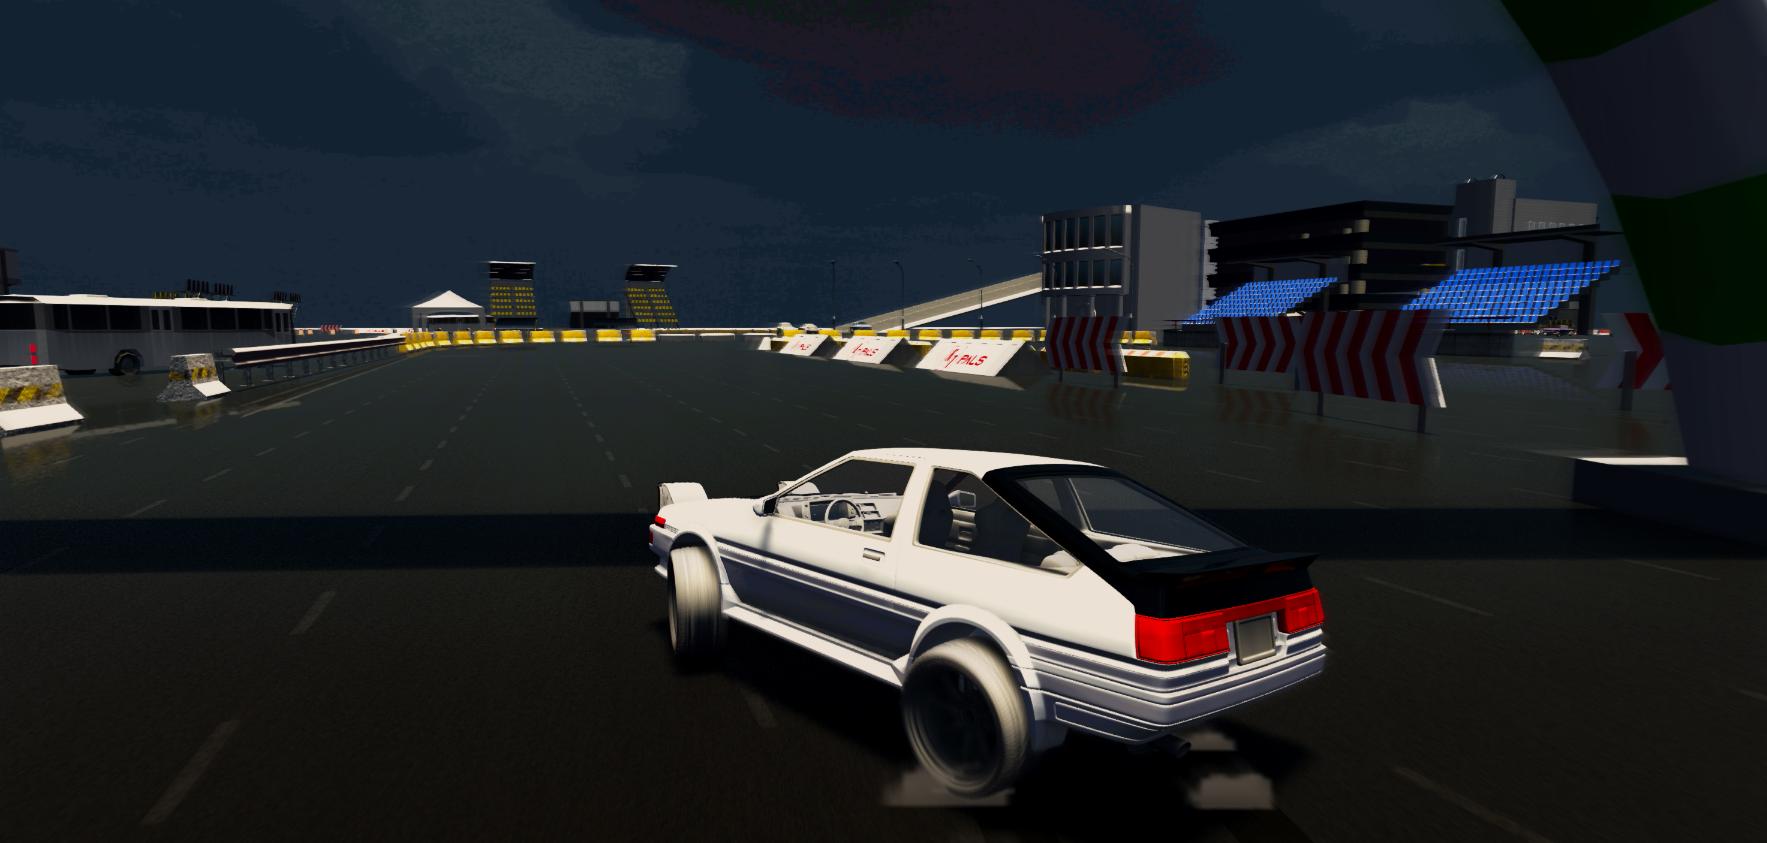 Drift Of The Hill PC Game - Free Download Full Version